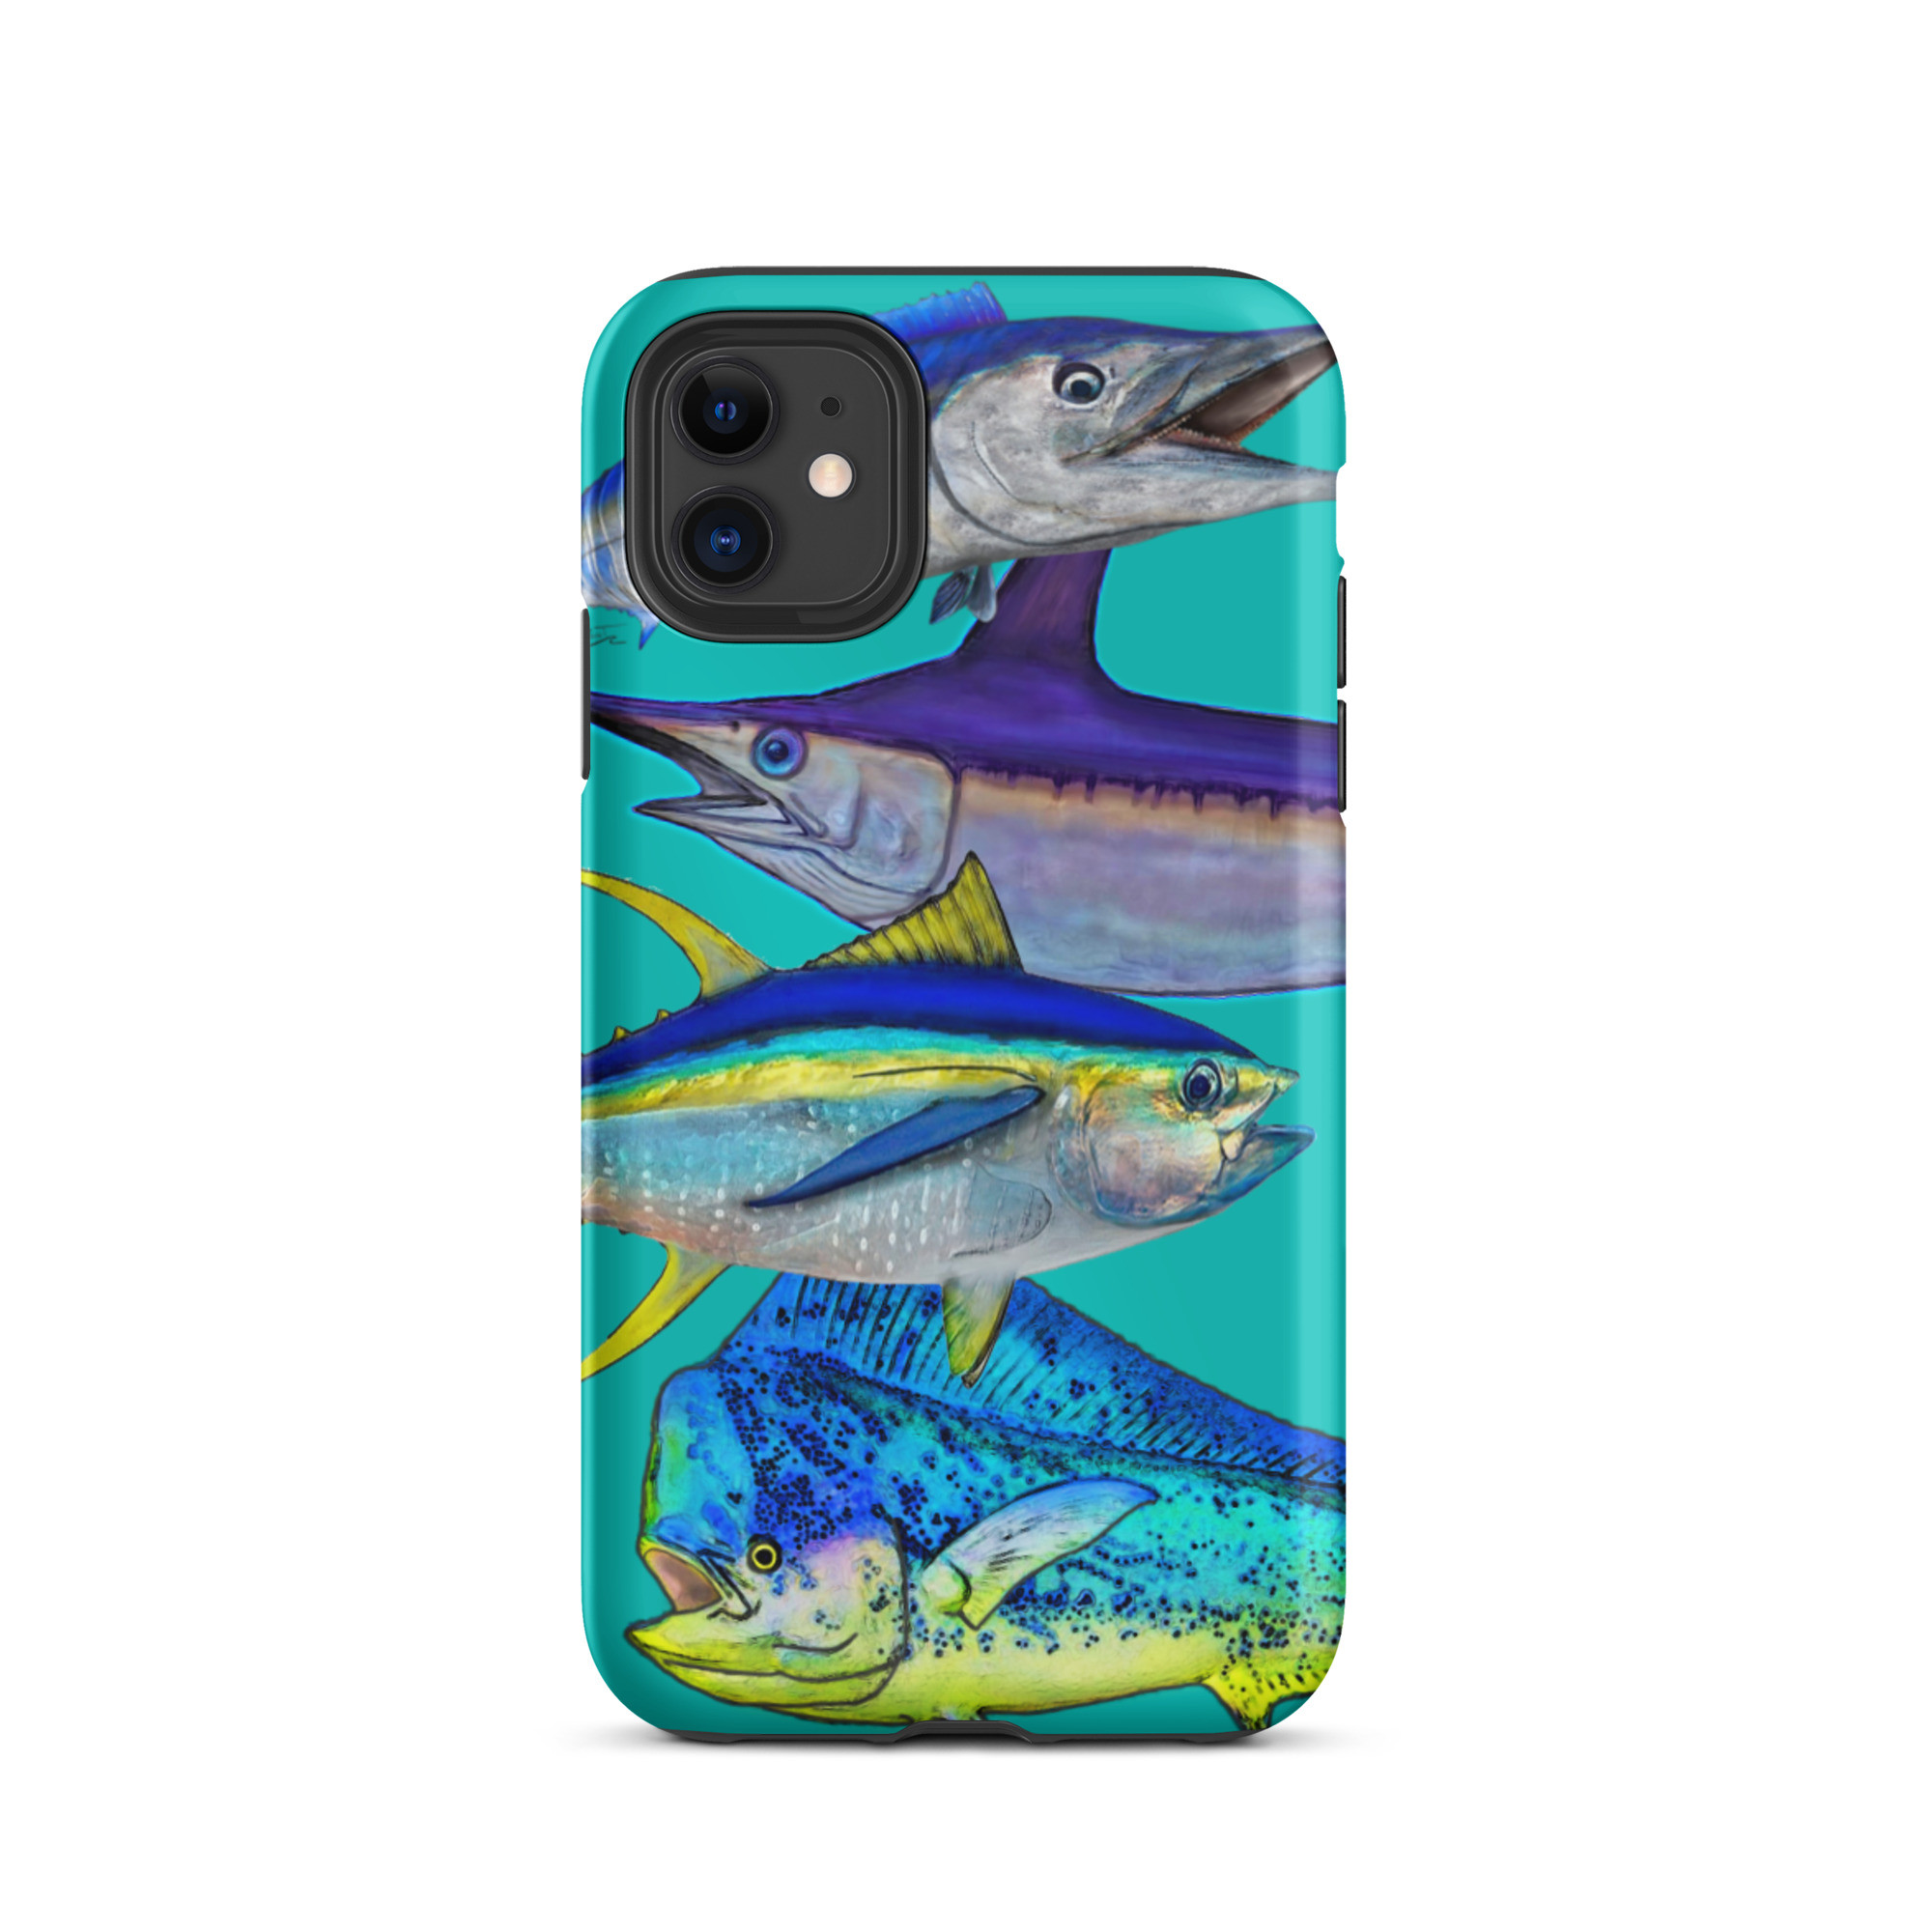 teal background mix fish Tough iPhone case - Sporty Girl Apparel